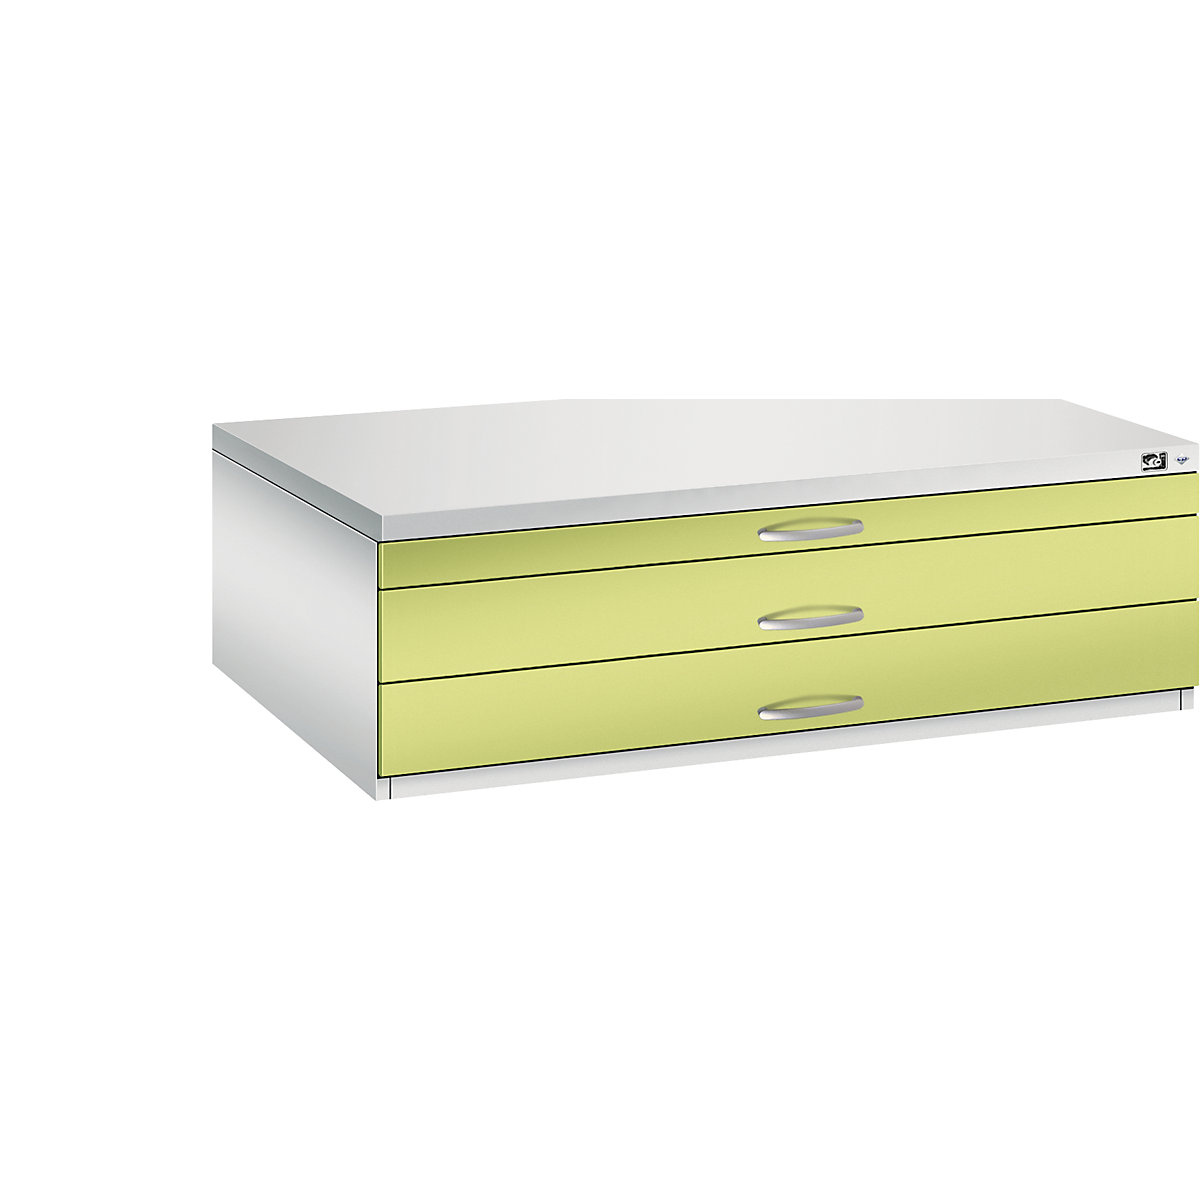 Drawing cabinet – C+P, A0, 3 drawers, height 420 mm, light grey / viridian green-17